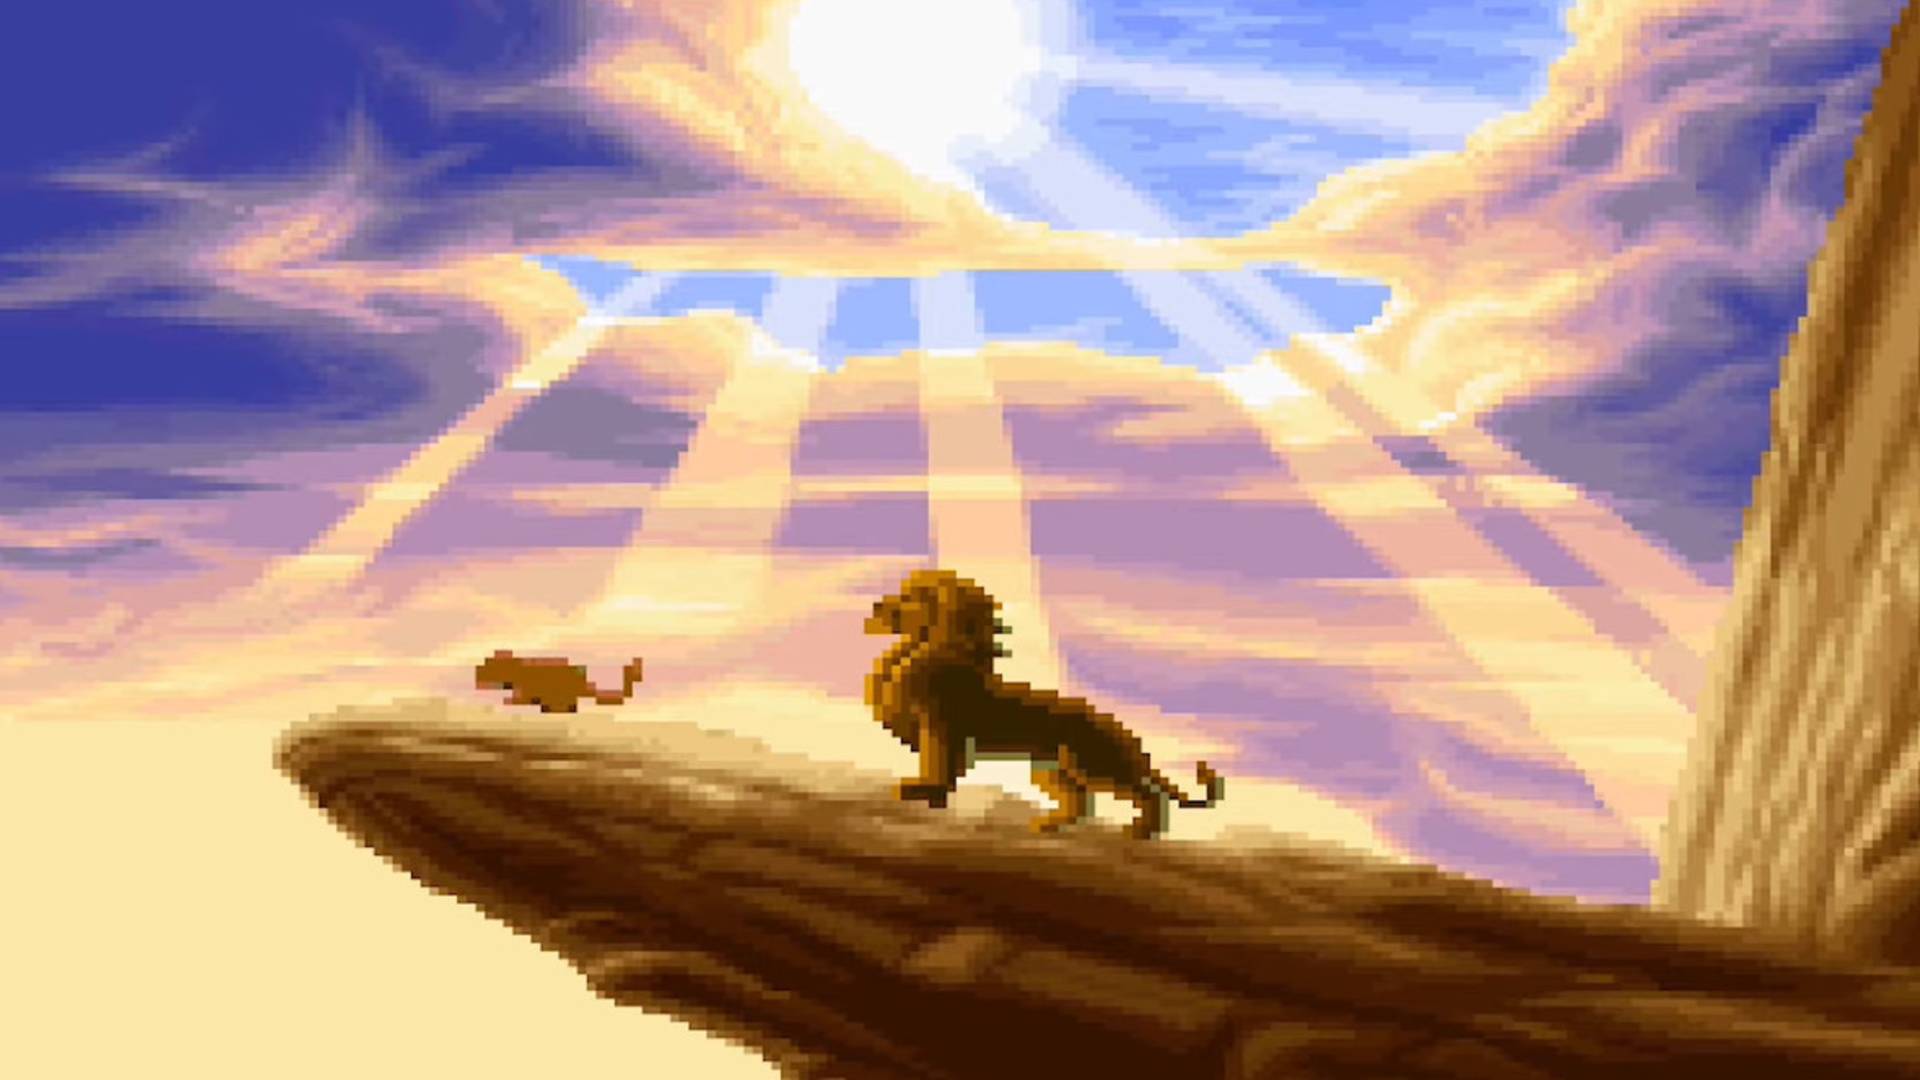 Best Disney games The Lion King: Simba and Mufasa on Pride Rock